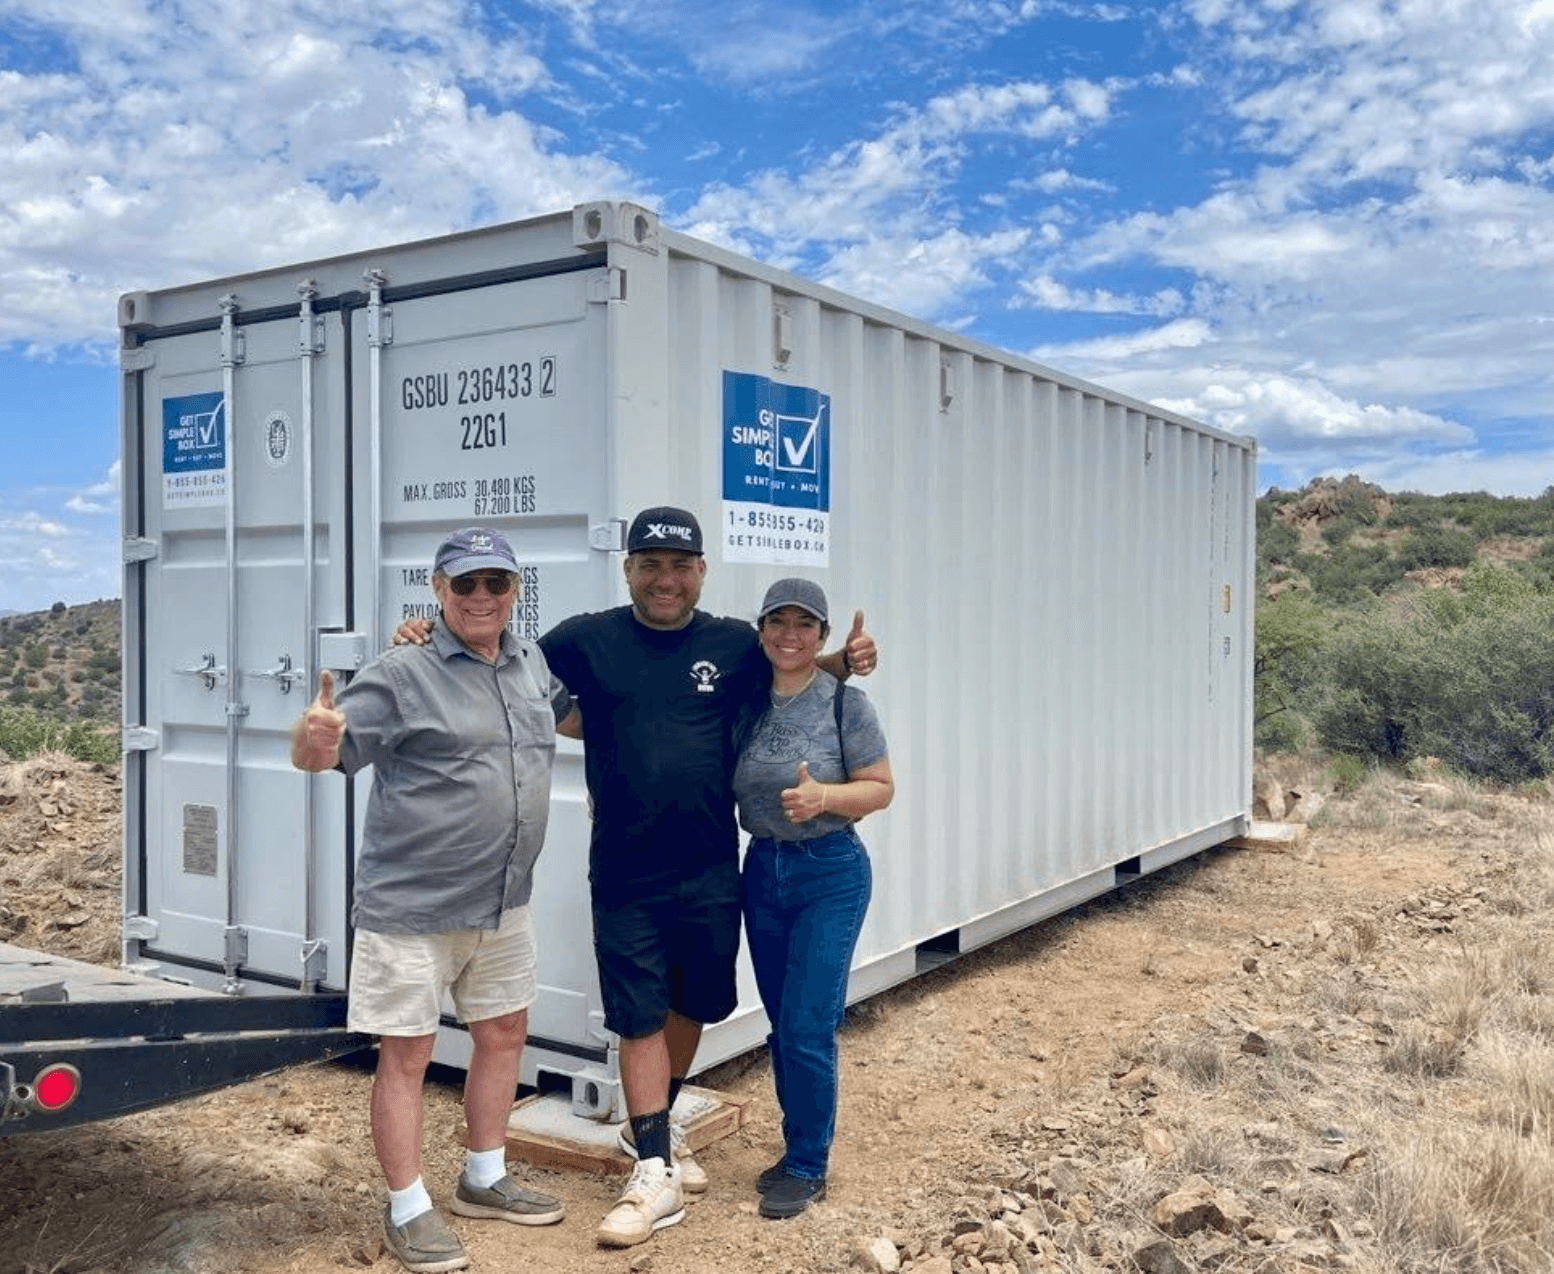 Moving Containers - Moving with a 20 foot shipping container and client experience